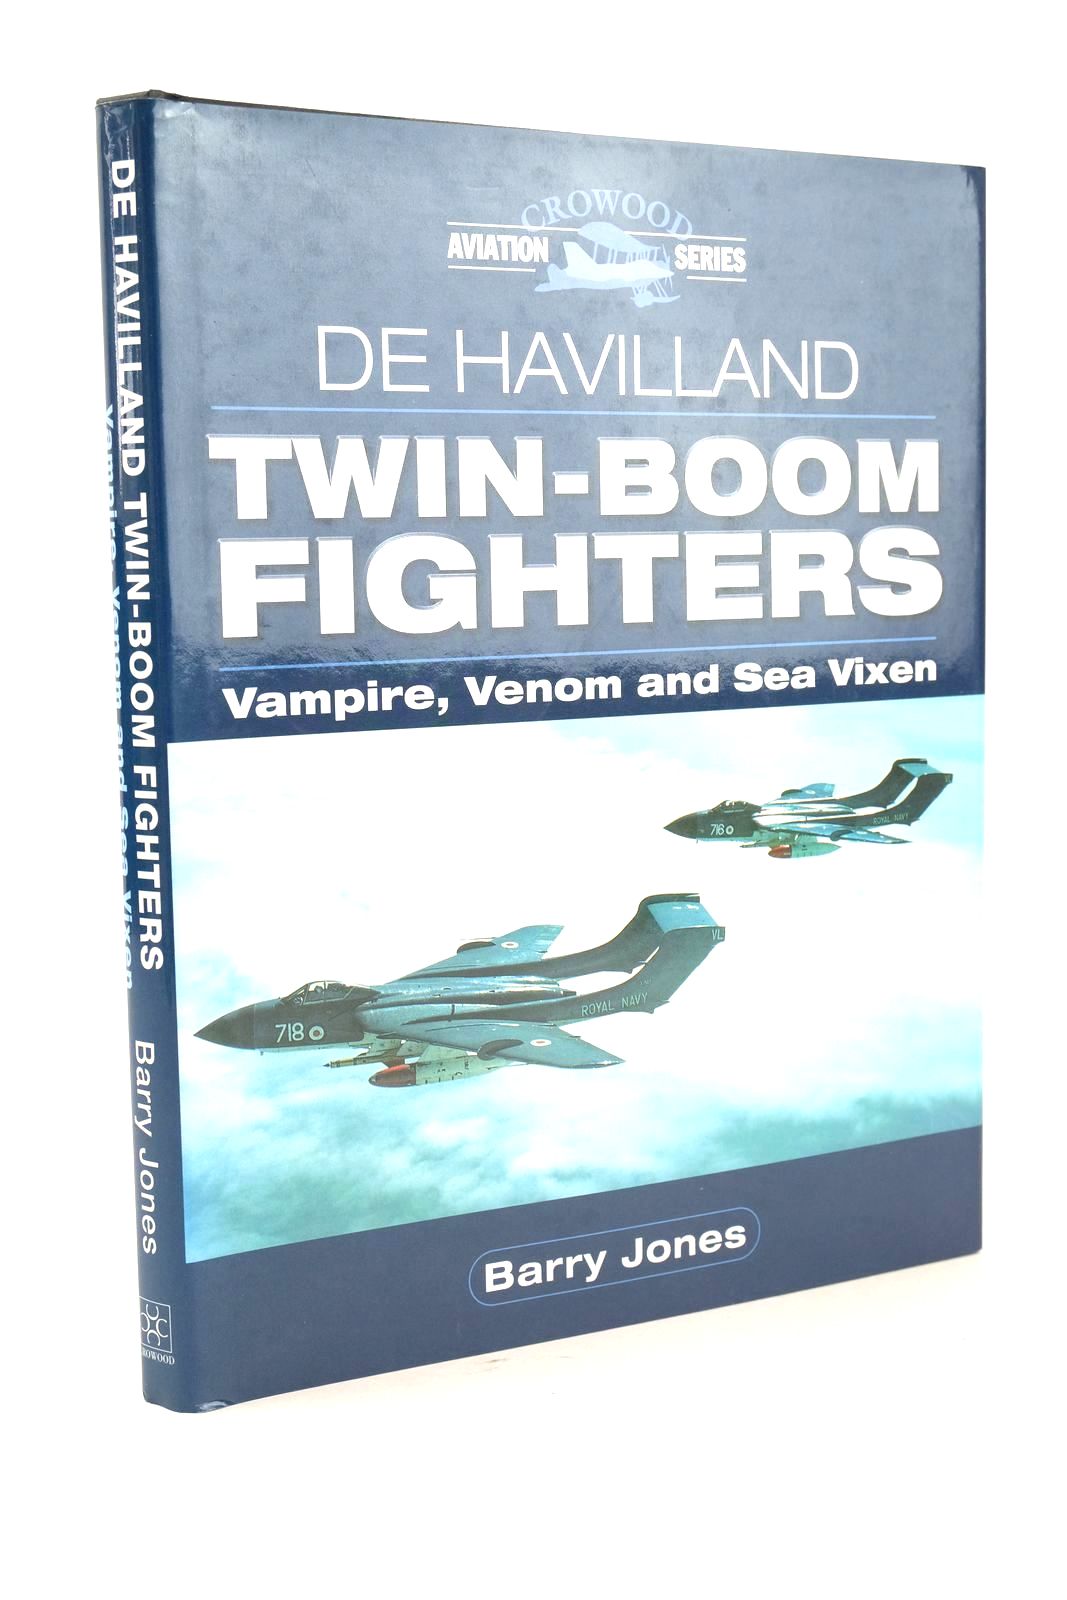 Photo of DE HAVILLAND TWIN-BOOM FIGHTERS: VAMPIRE, VENOM AND SEA VIXEN (CROWOOD AVIATION SERIES) written by Jones, Barry published by The Crowood Press (STOCK CODE: 1325548)  for sale by Stella & Rose's Books